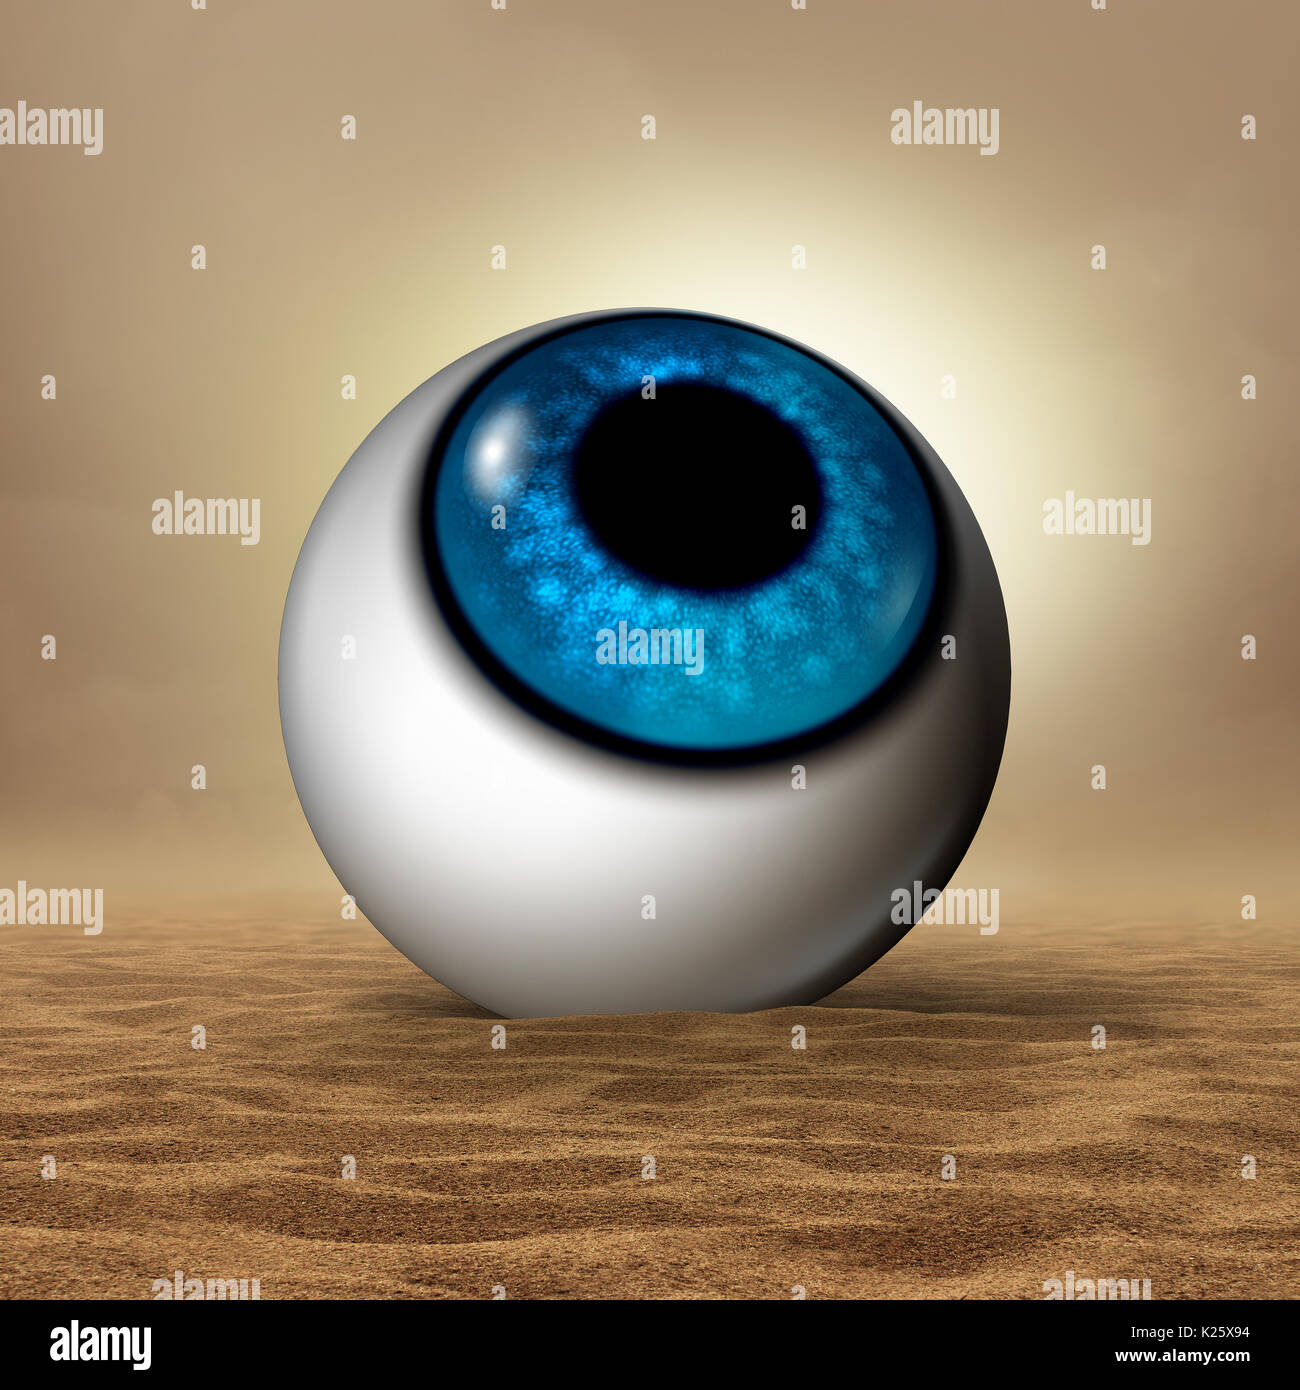 Dry eye disease medical concept as a human eyeball in an arid desert as an opthalmology or optometry symbol for vision organ symptoms of dryness. Stock Photo